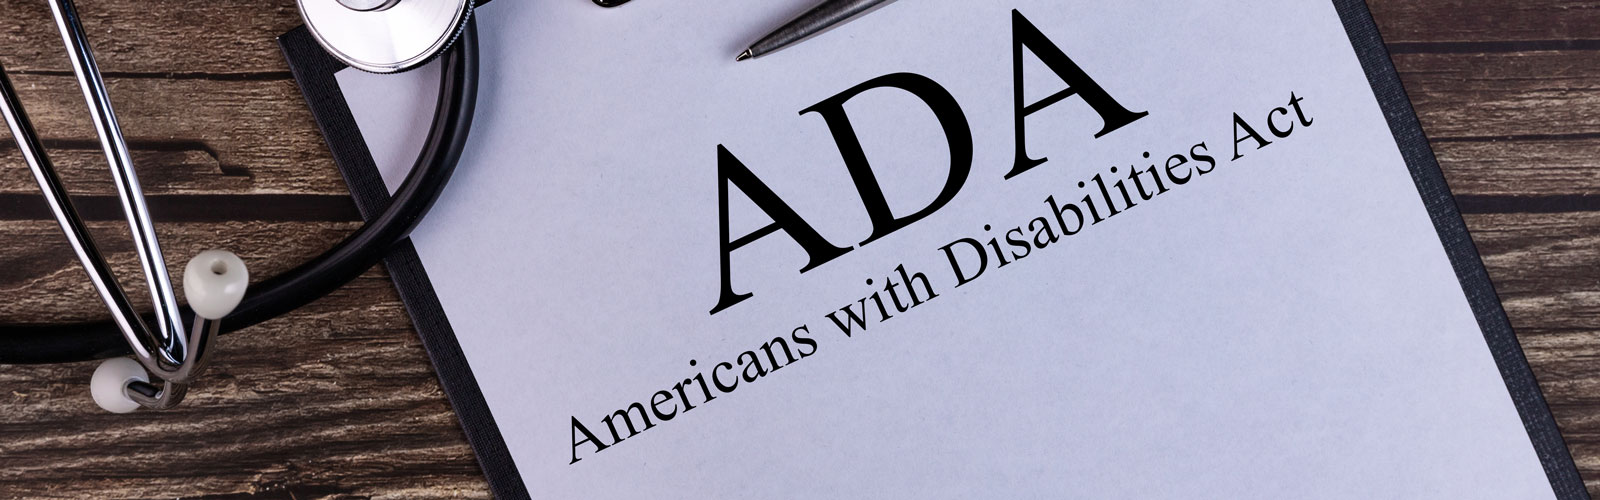 Paper on clipboard, with typed title ADA (Americans with Disabilities Act). 